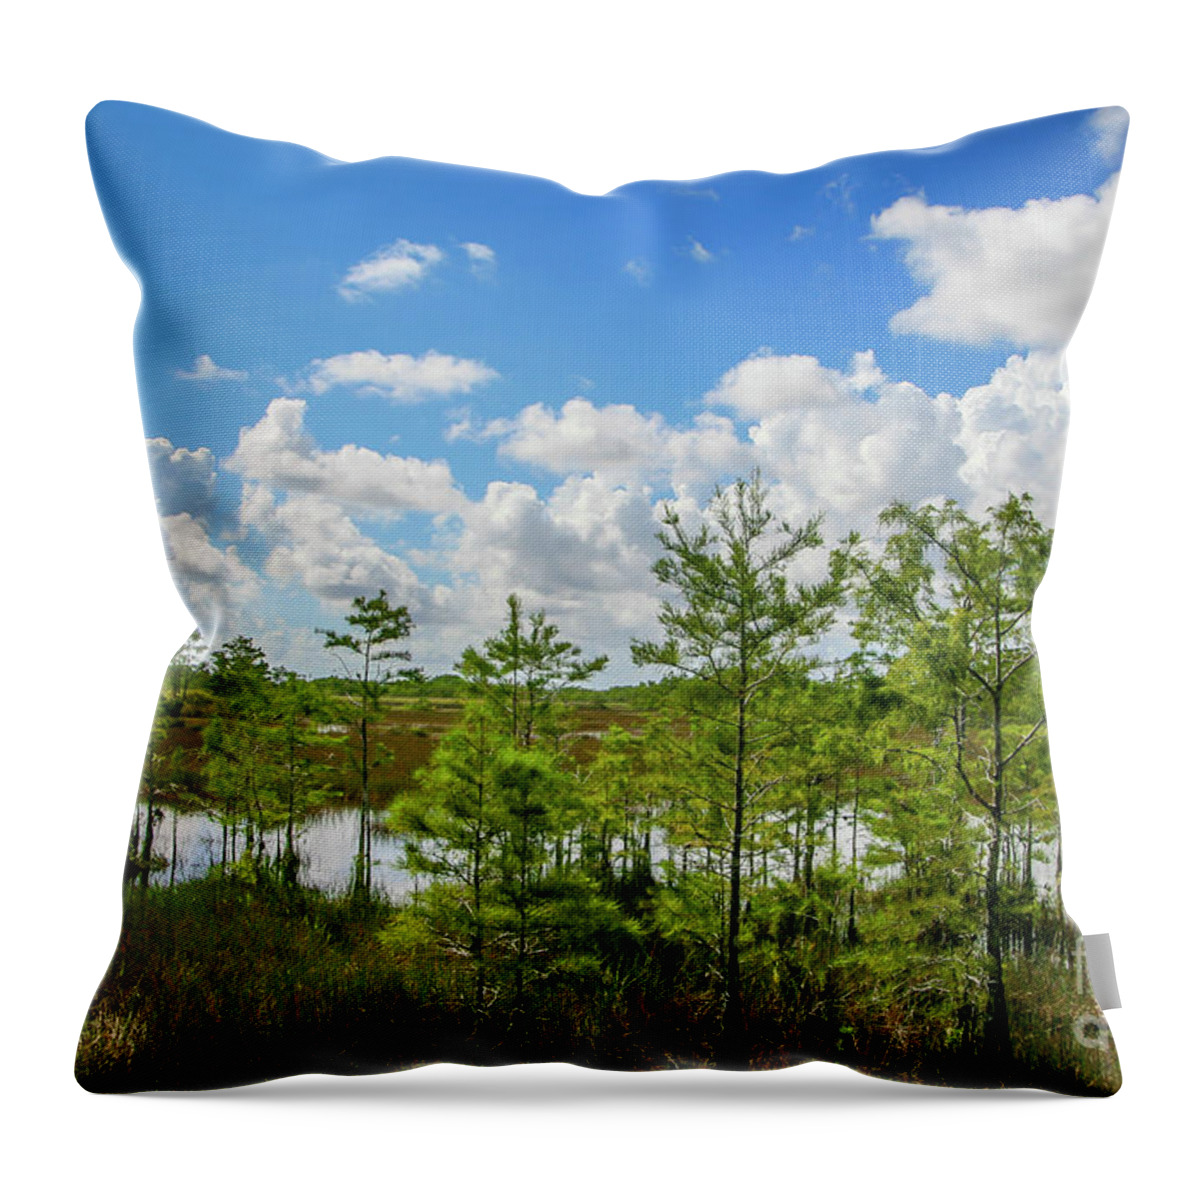 Sky Throw Pillow featuring the photograph Blue Sky Over Grassy Waters by Tom Claud